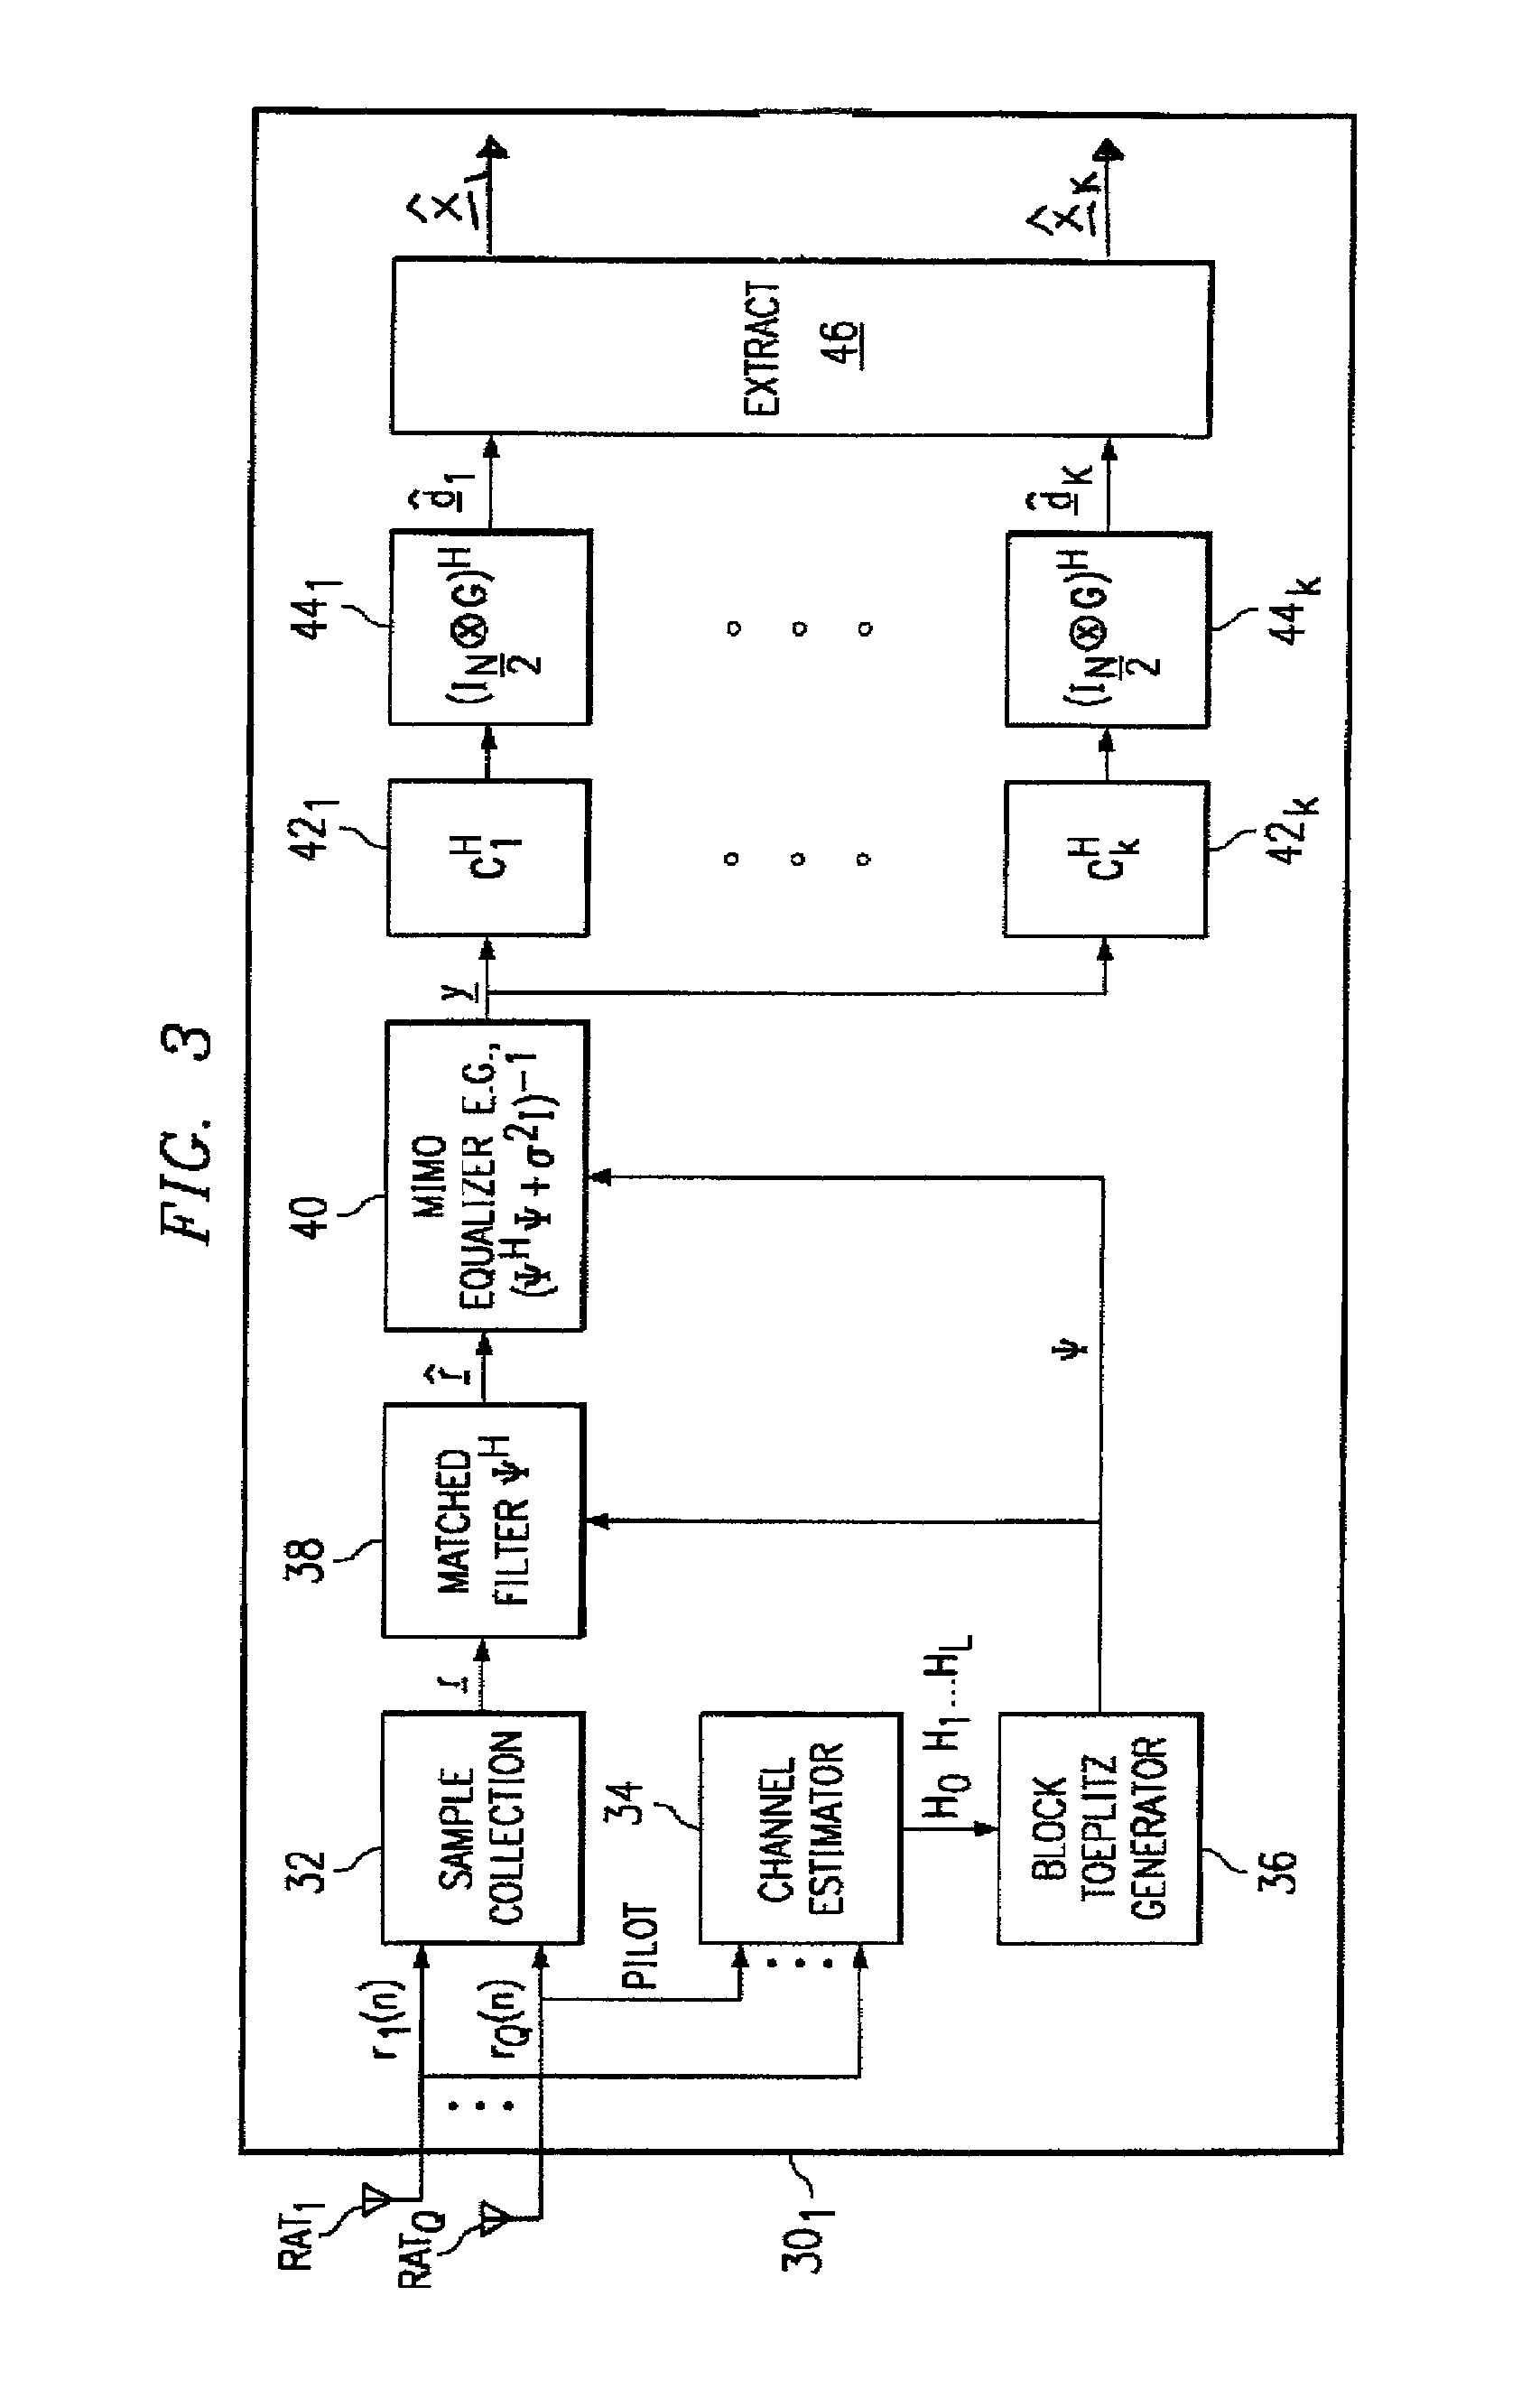 Space time encoded wireless communication system with multipath resolution receivers